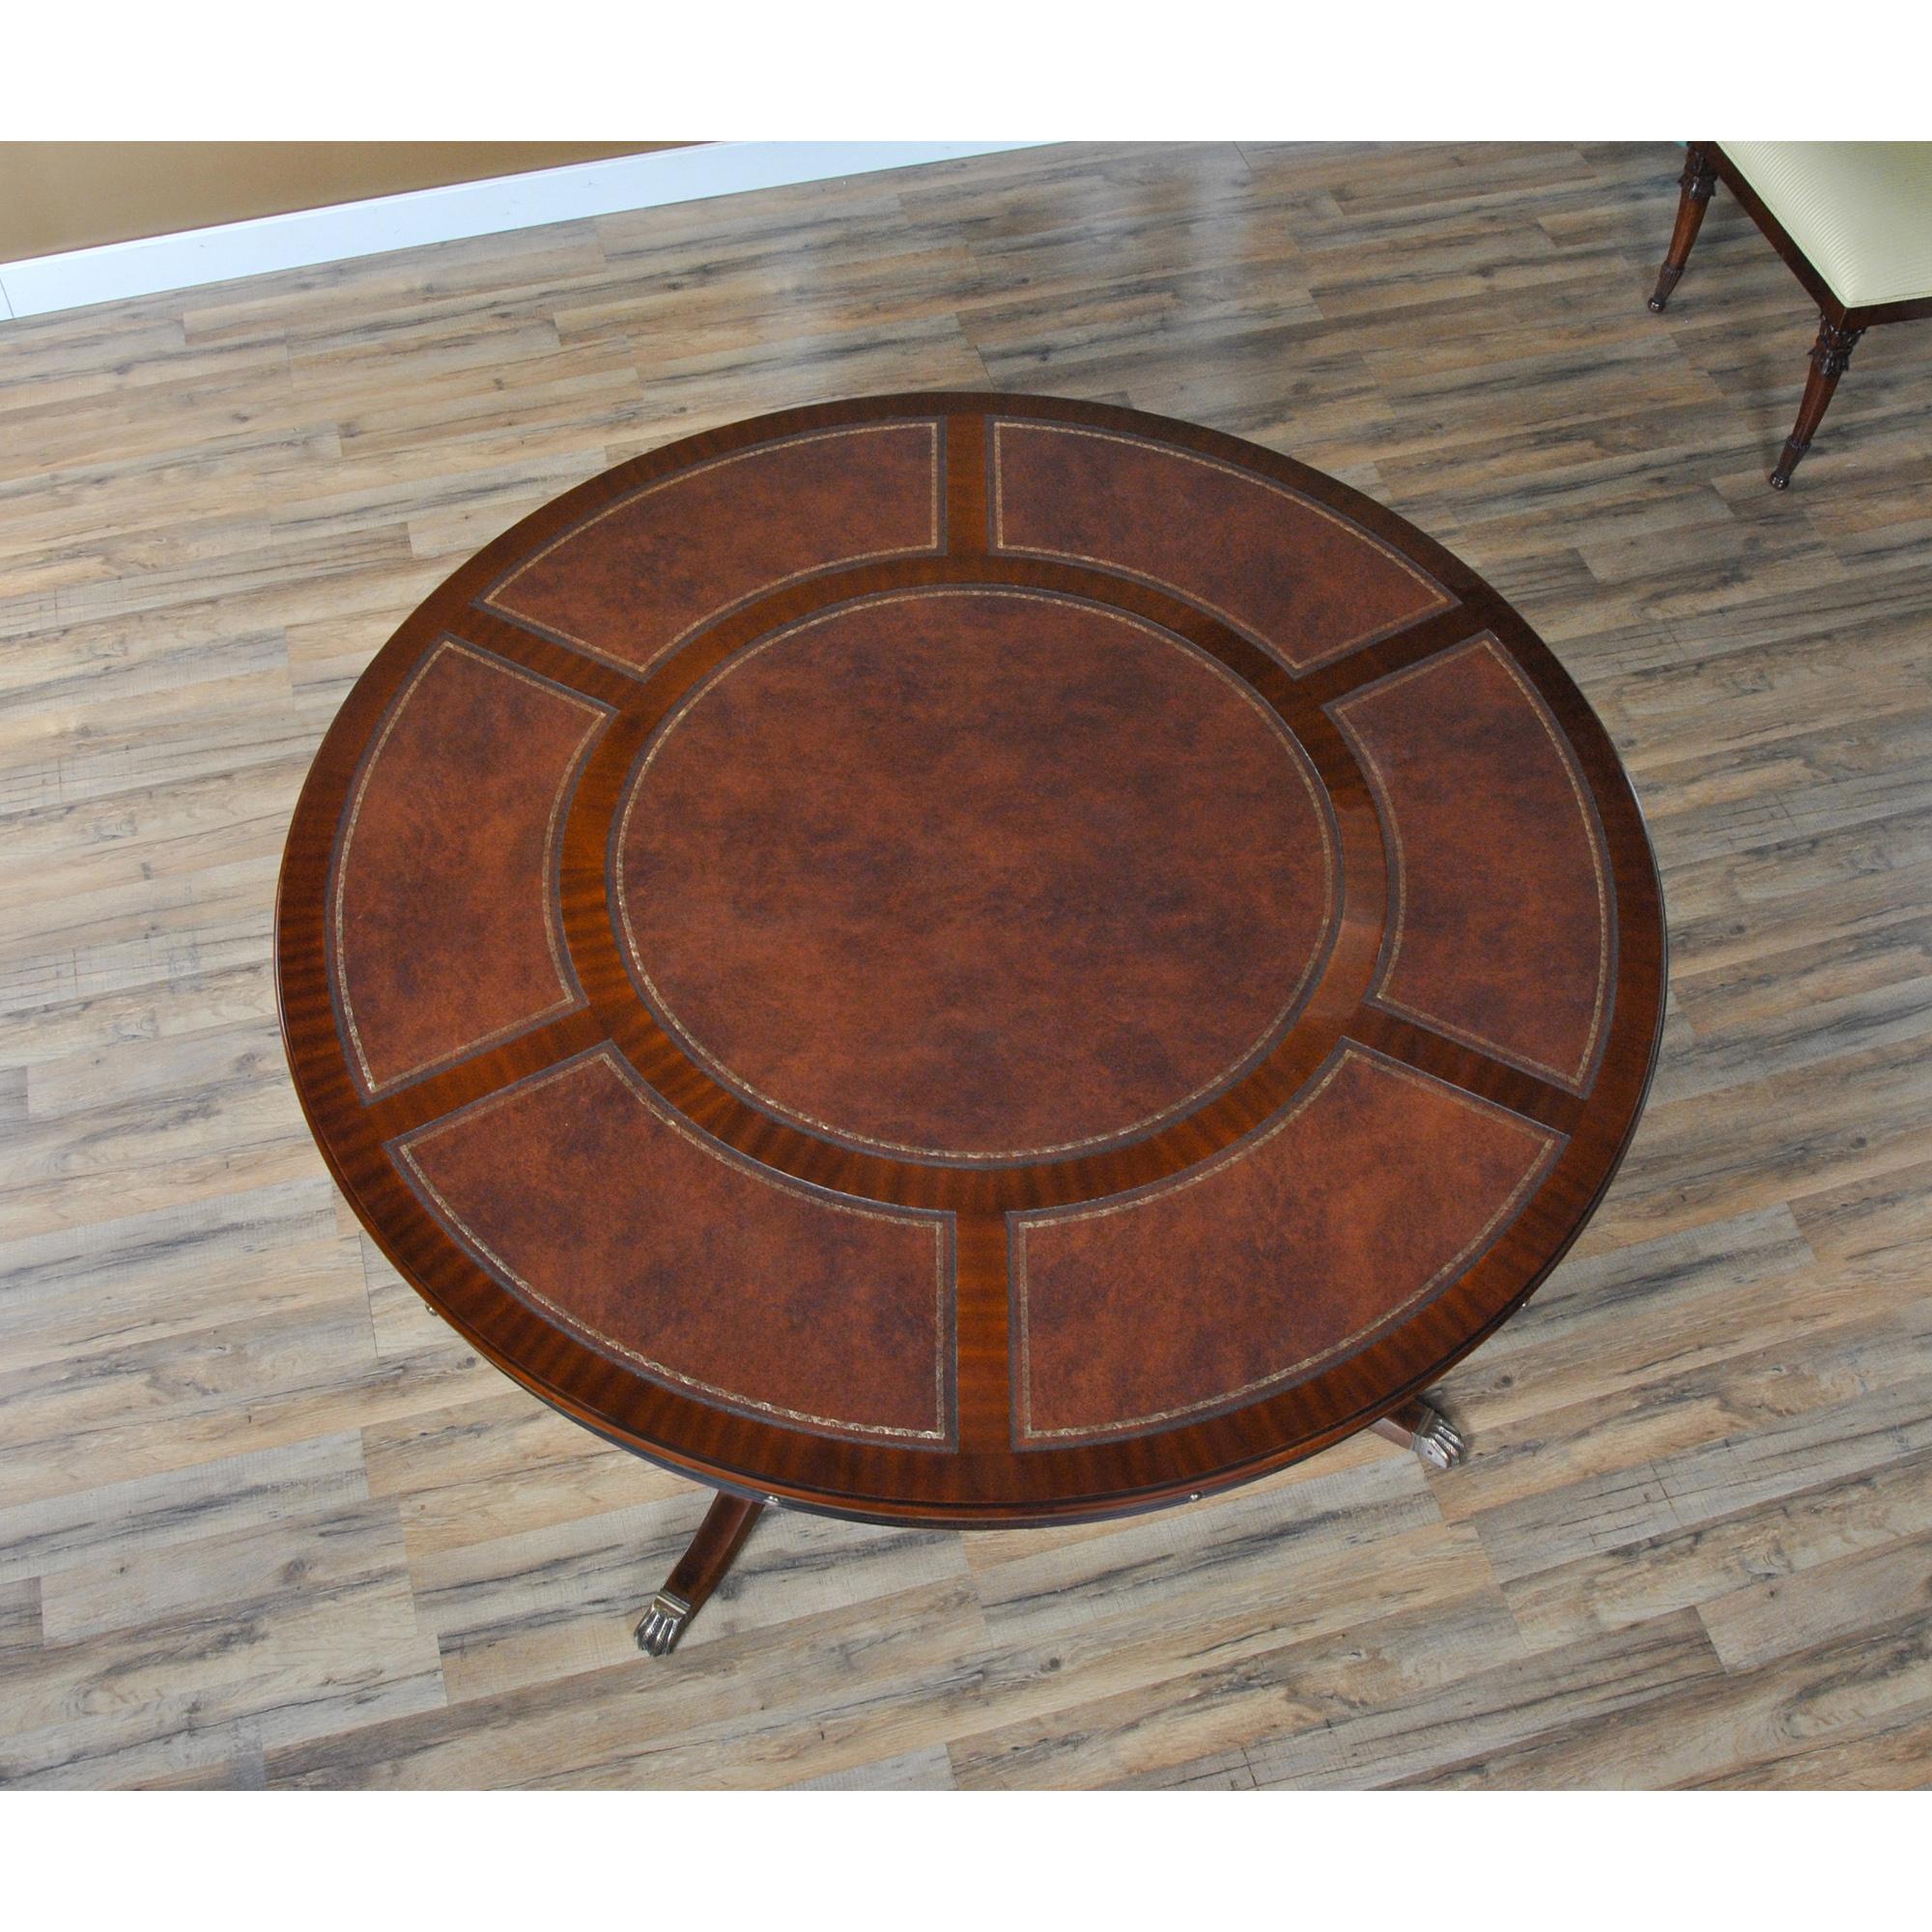 A sixty inch to eighty four inch round Leather Top Perimeter Dining Table is produced with a high quality full grain leather field and sapele banding makes for a subtle but interesting contrast in the pattern on the top. Surrounding the top can be